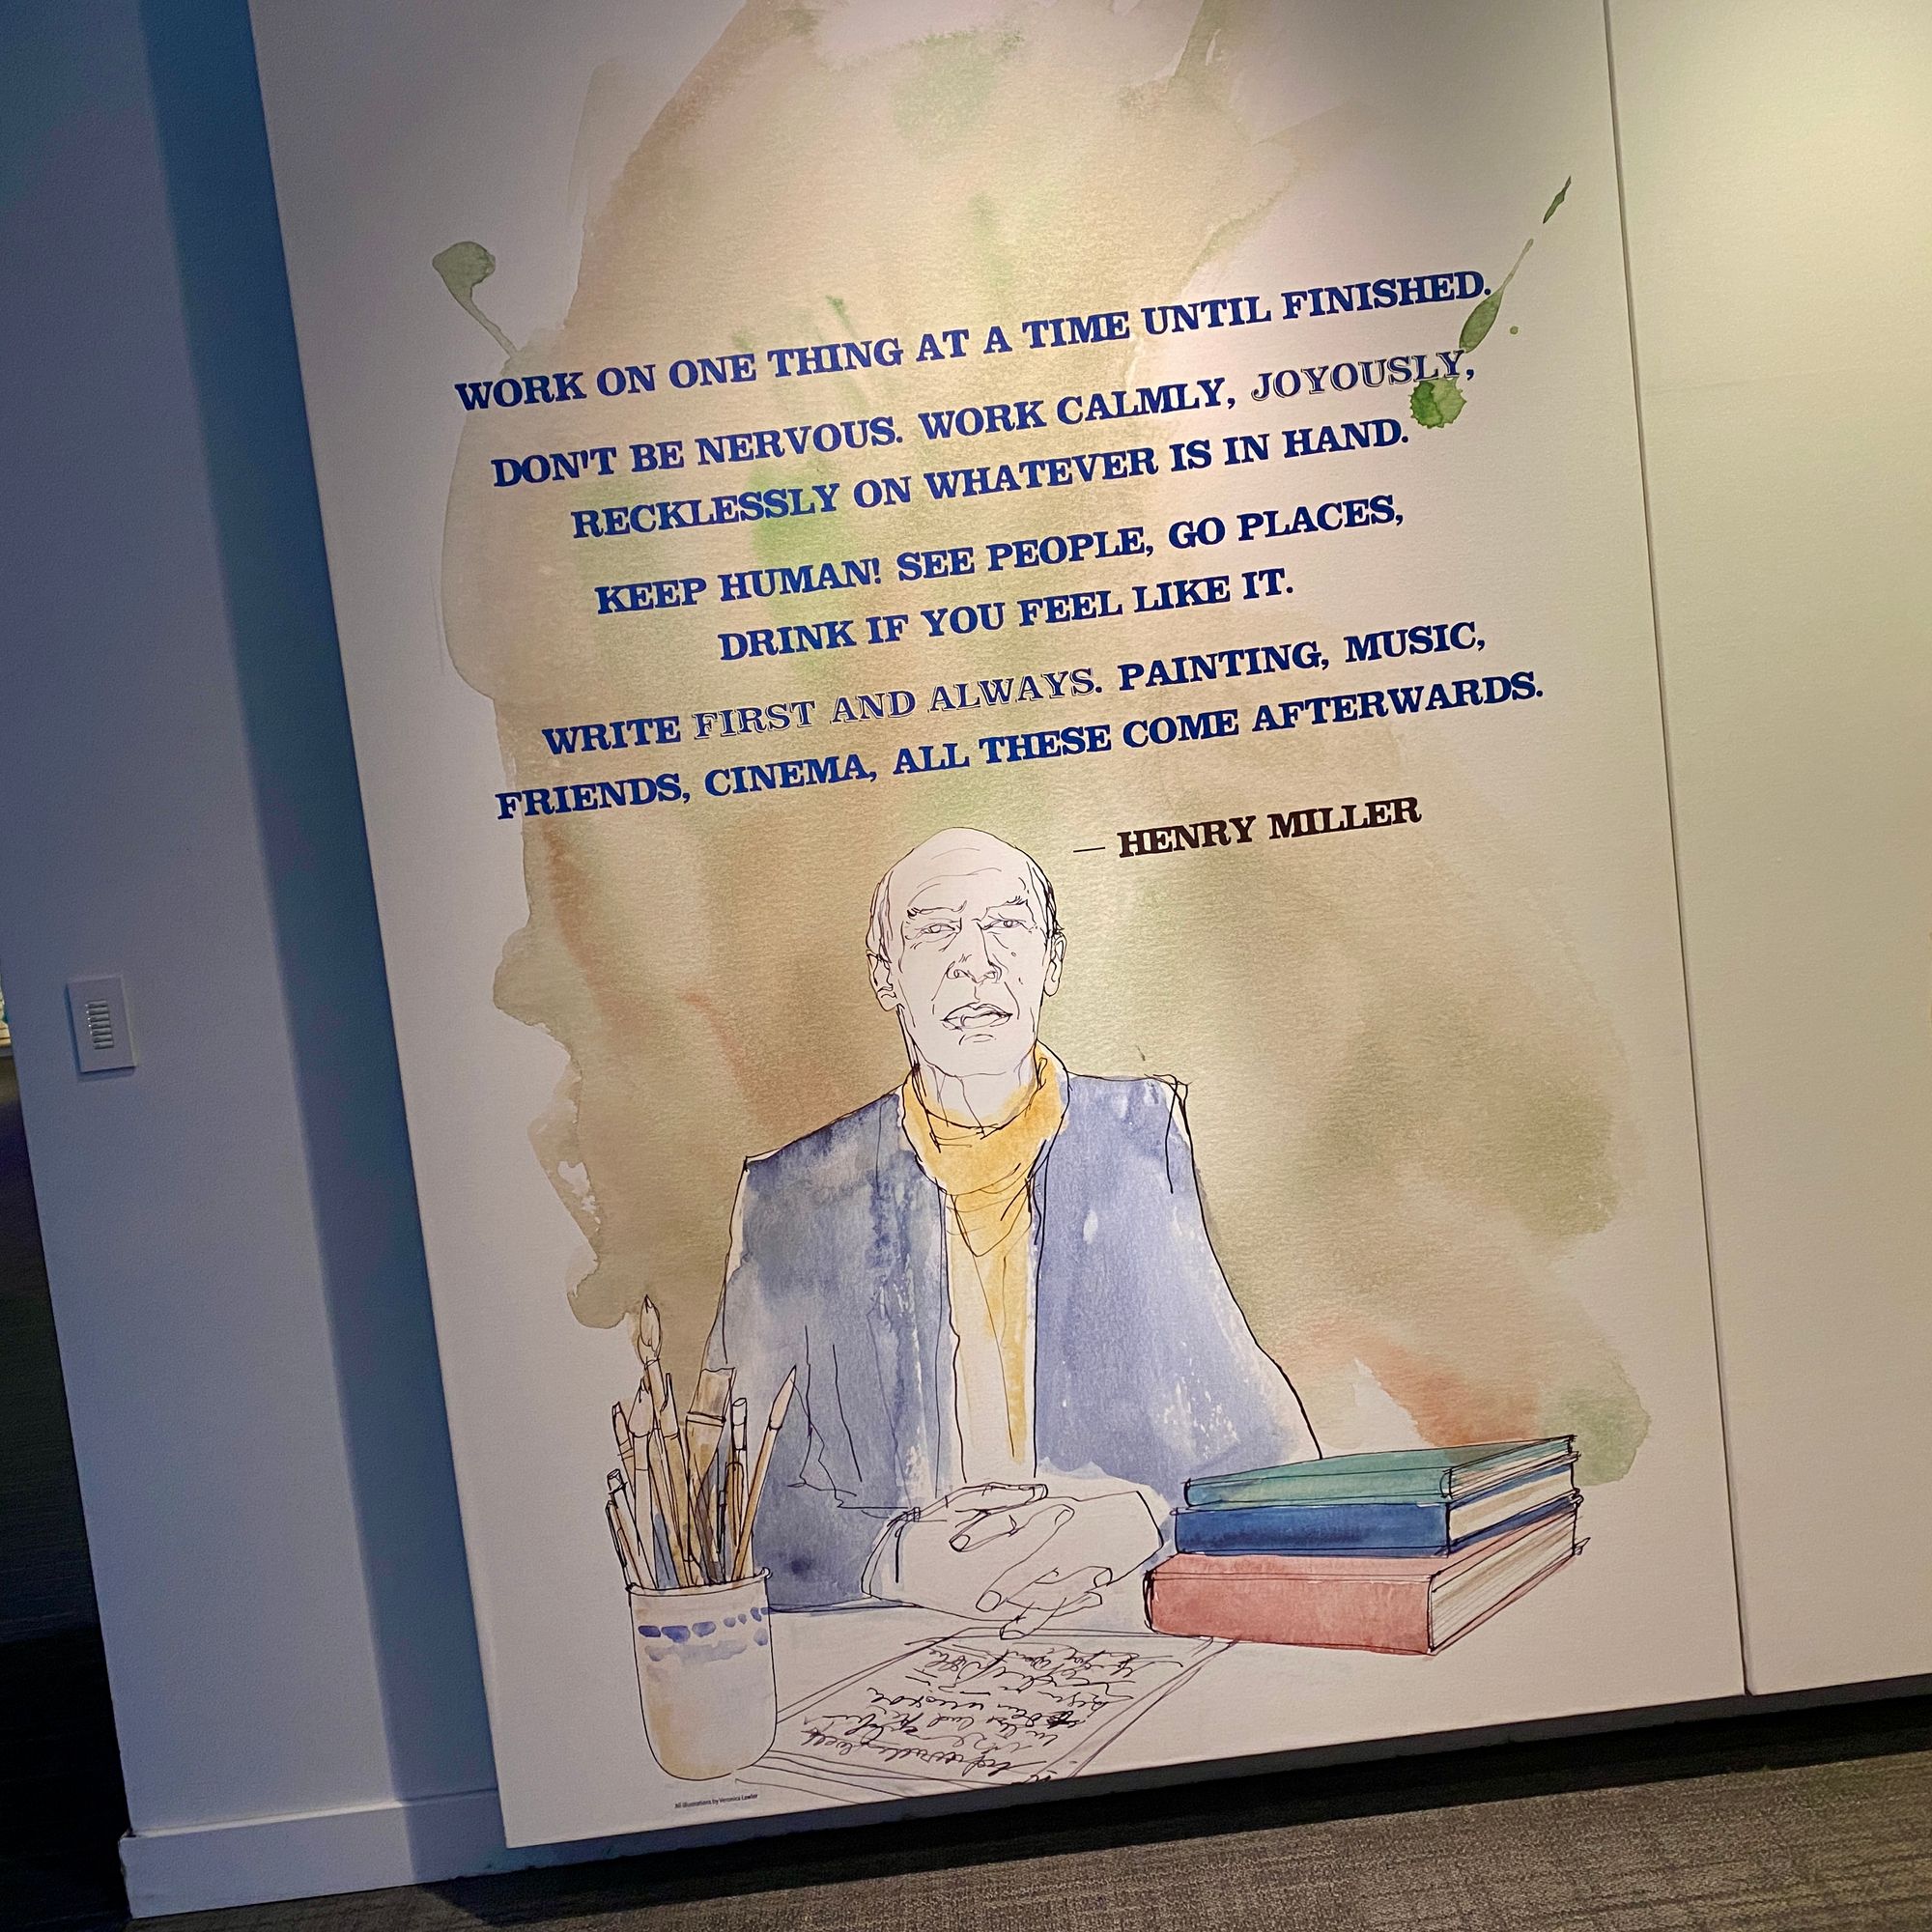 Portion of museum wall with a watercolor image of Henry Miller, an older white man, with the quote: "Work on one thing at a time until finished. Don't be nervous. Work calmly, joyously, recklessly on whatever is at hand. Keep human! See people, go places, drink if you feel like it. Write first and always. Painting, music, friends, cinema, all these come afterwards."